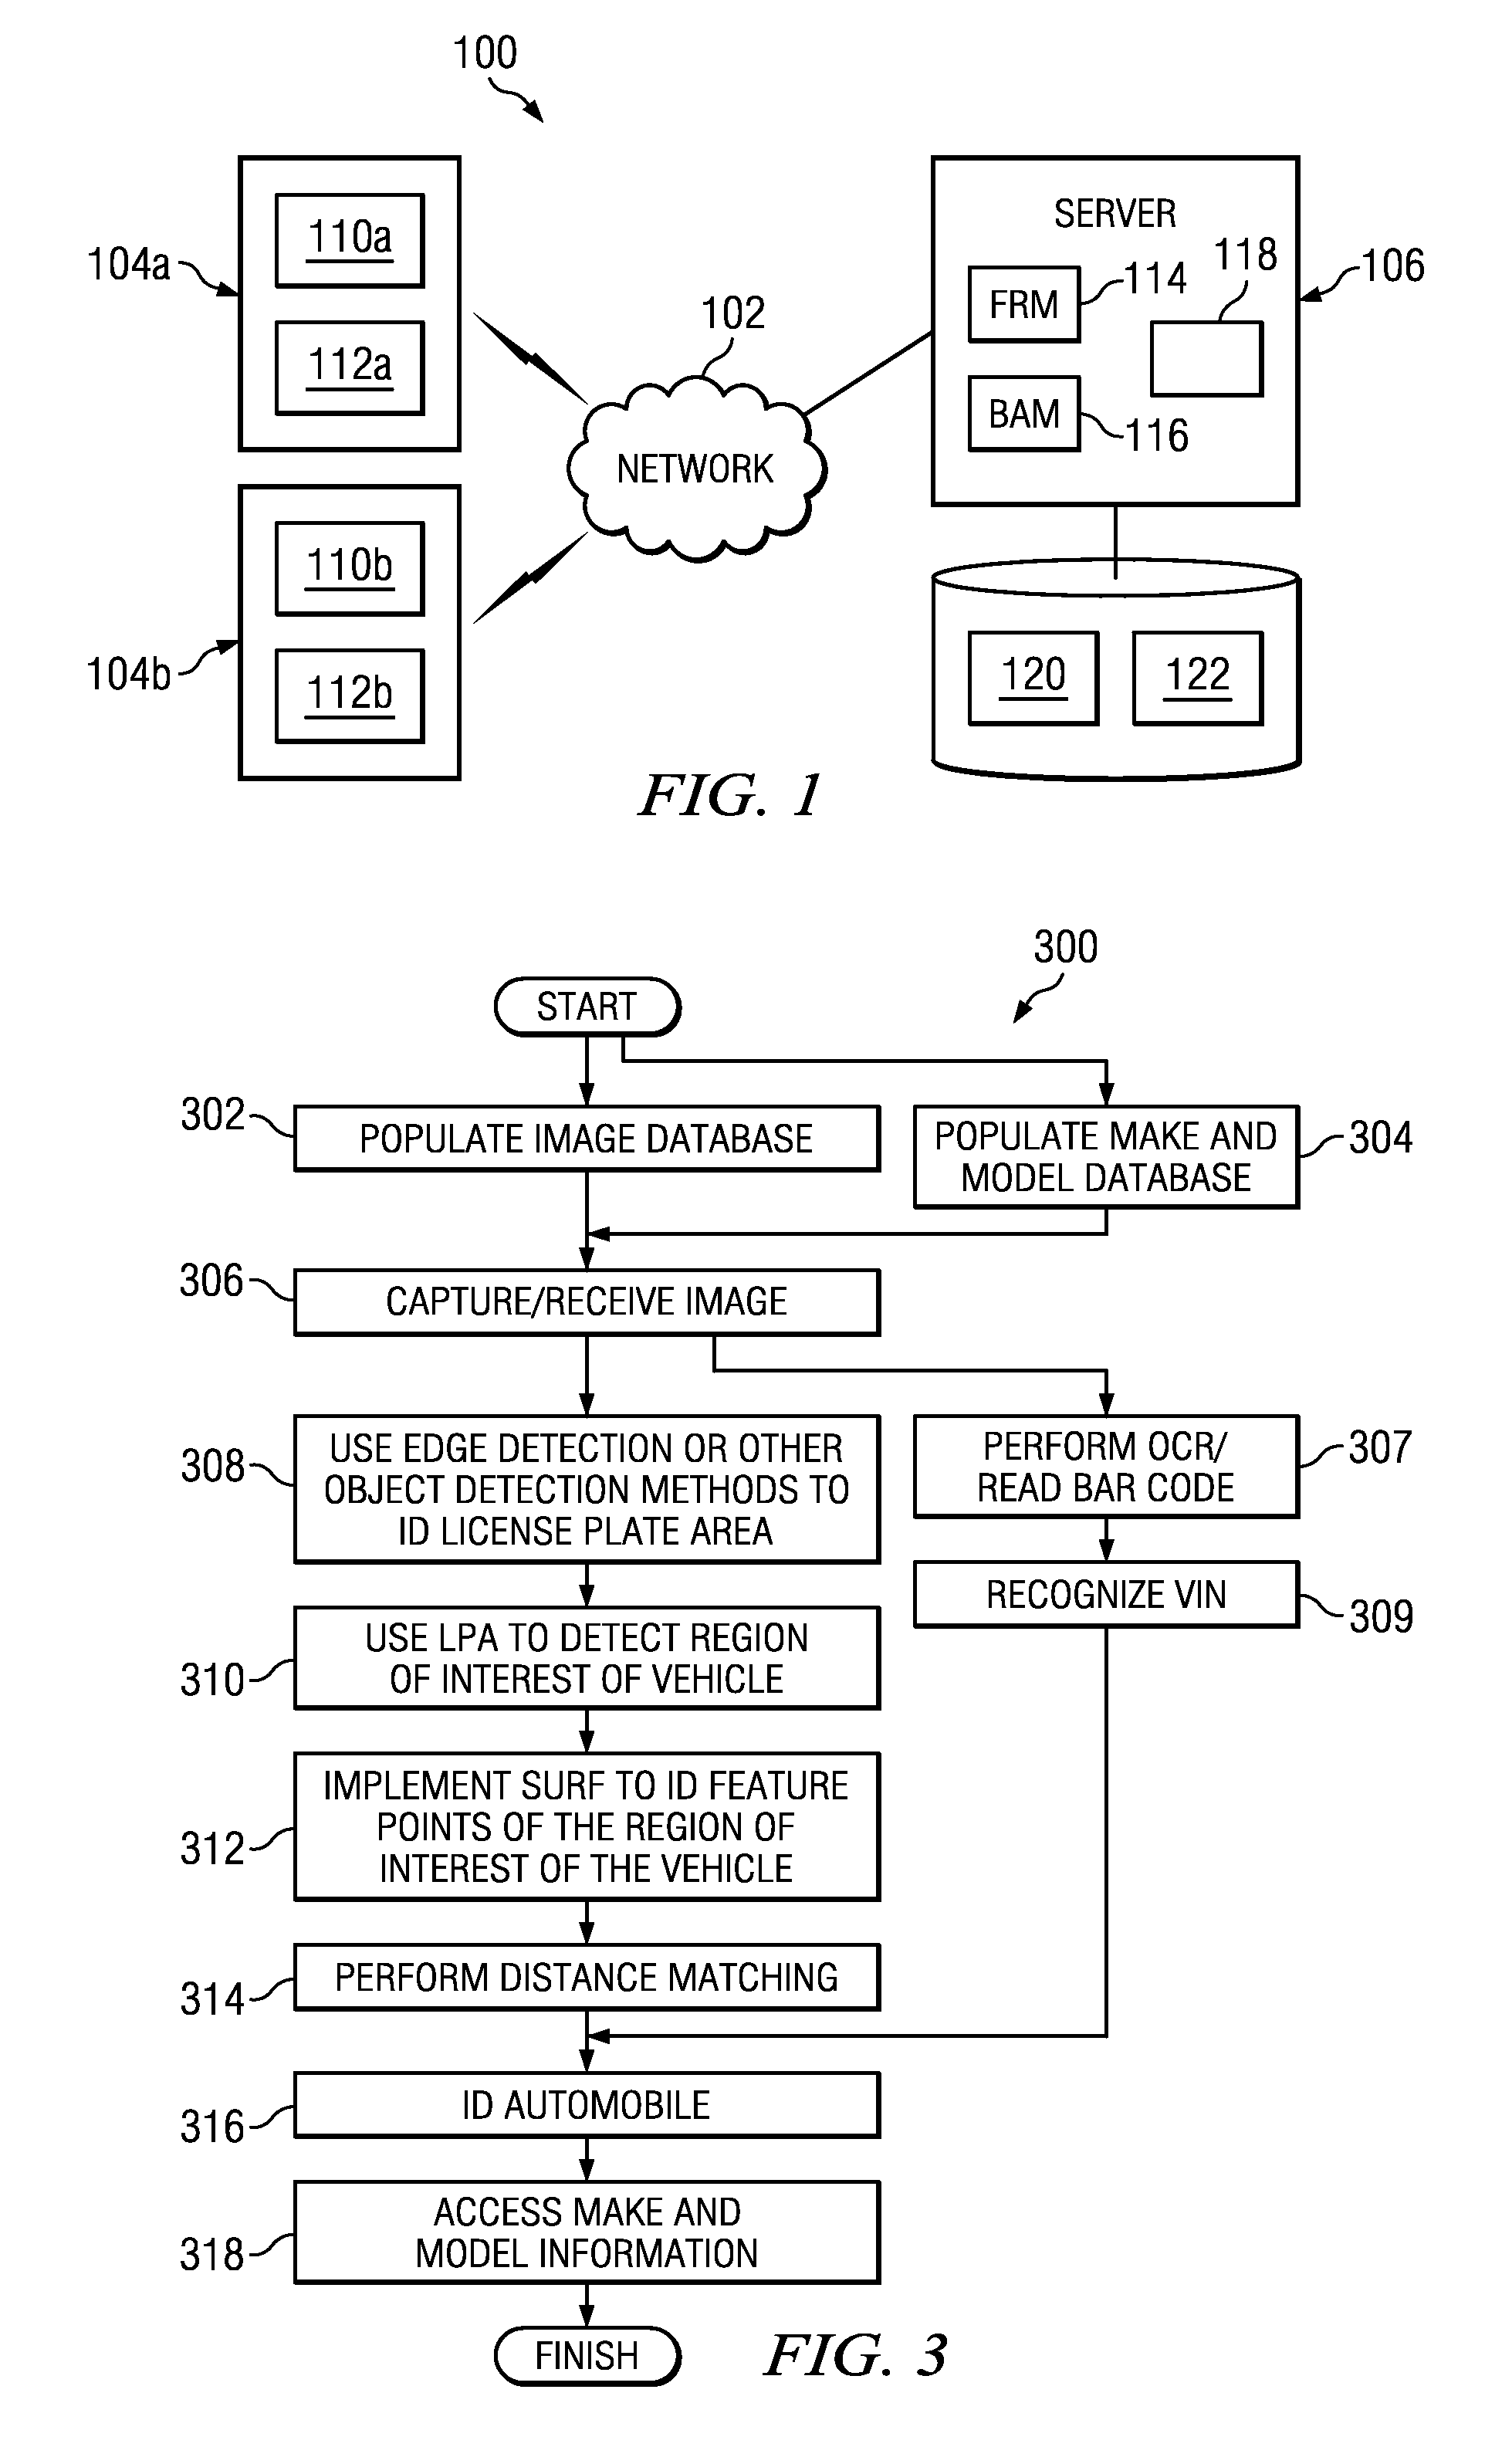 System and method for providing automotive purchase, insurance quote, and vehicle financing information using vehicle recognition